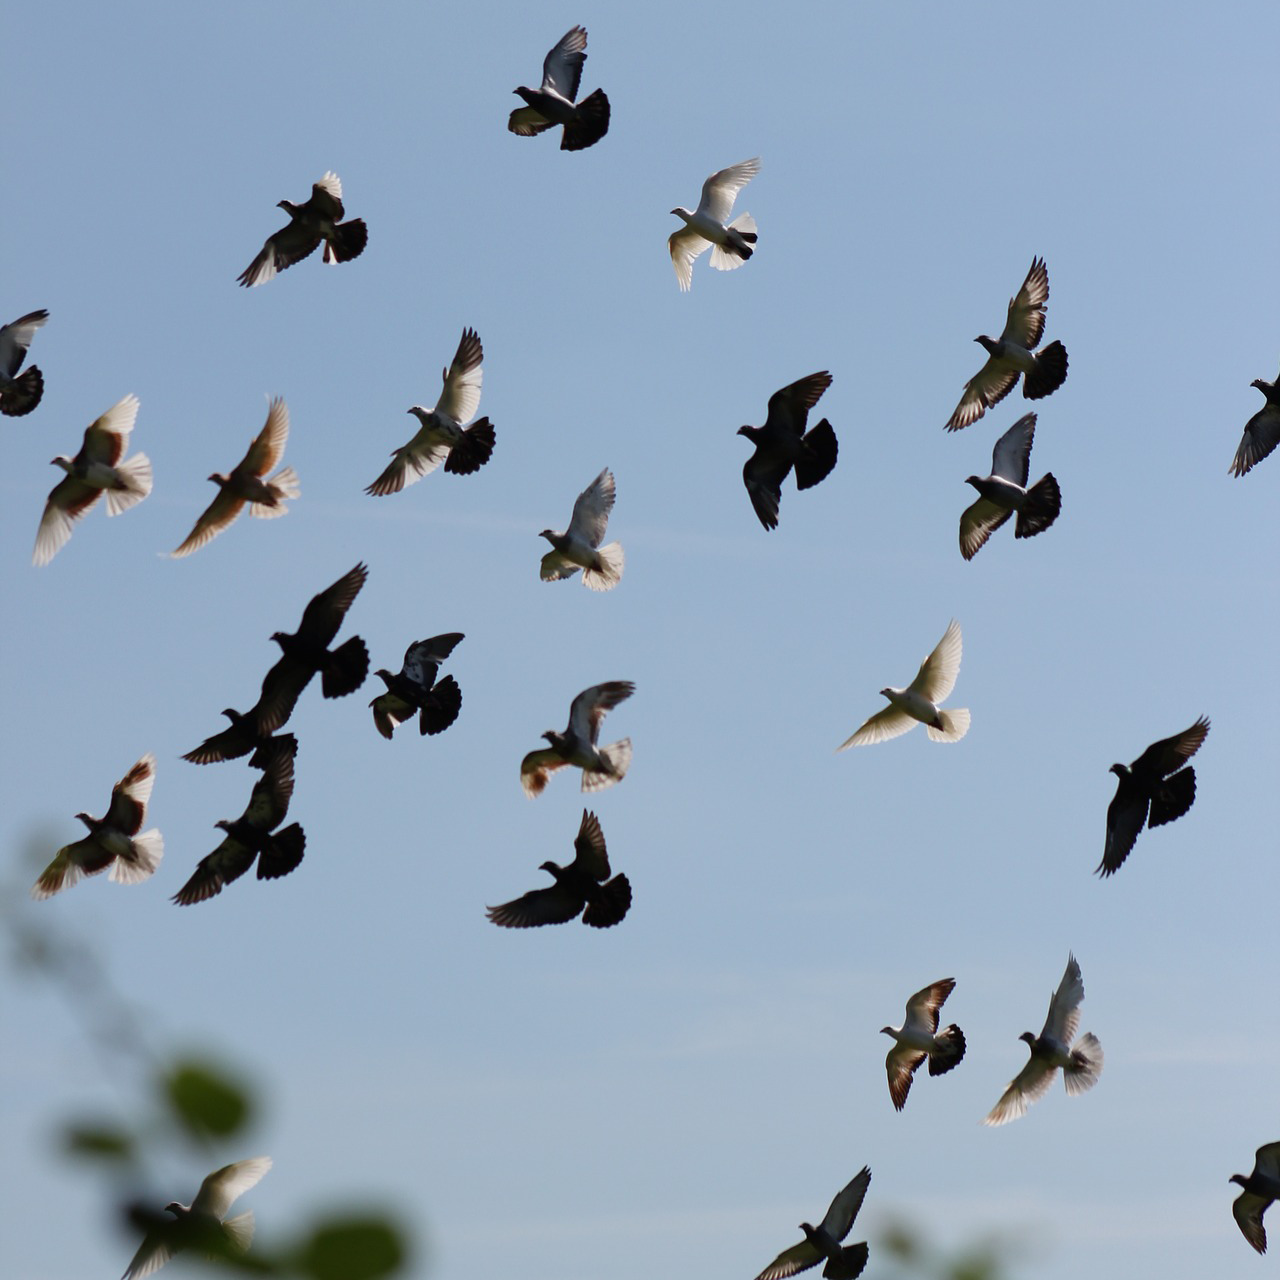 A flock of pigeons in flight appear against a blue sky